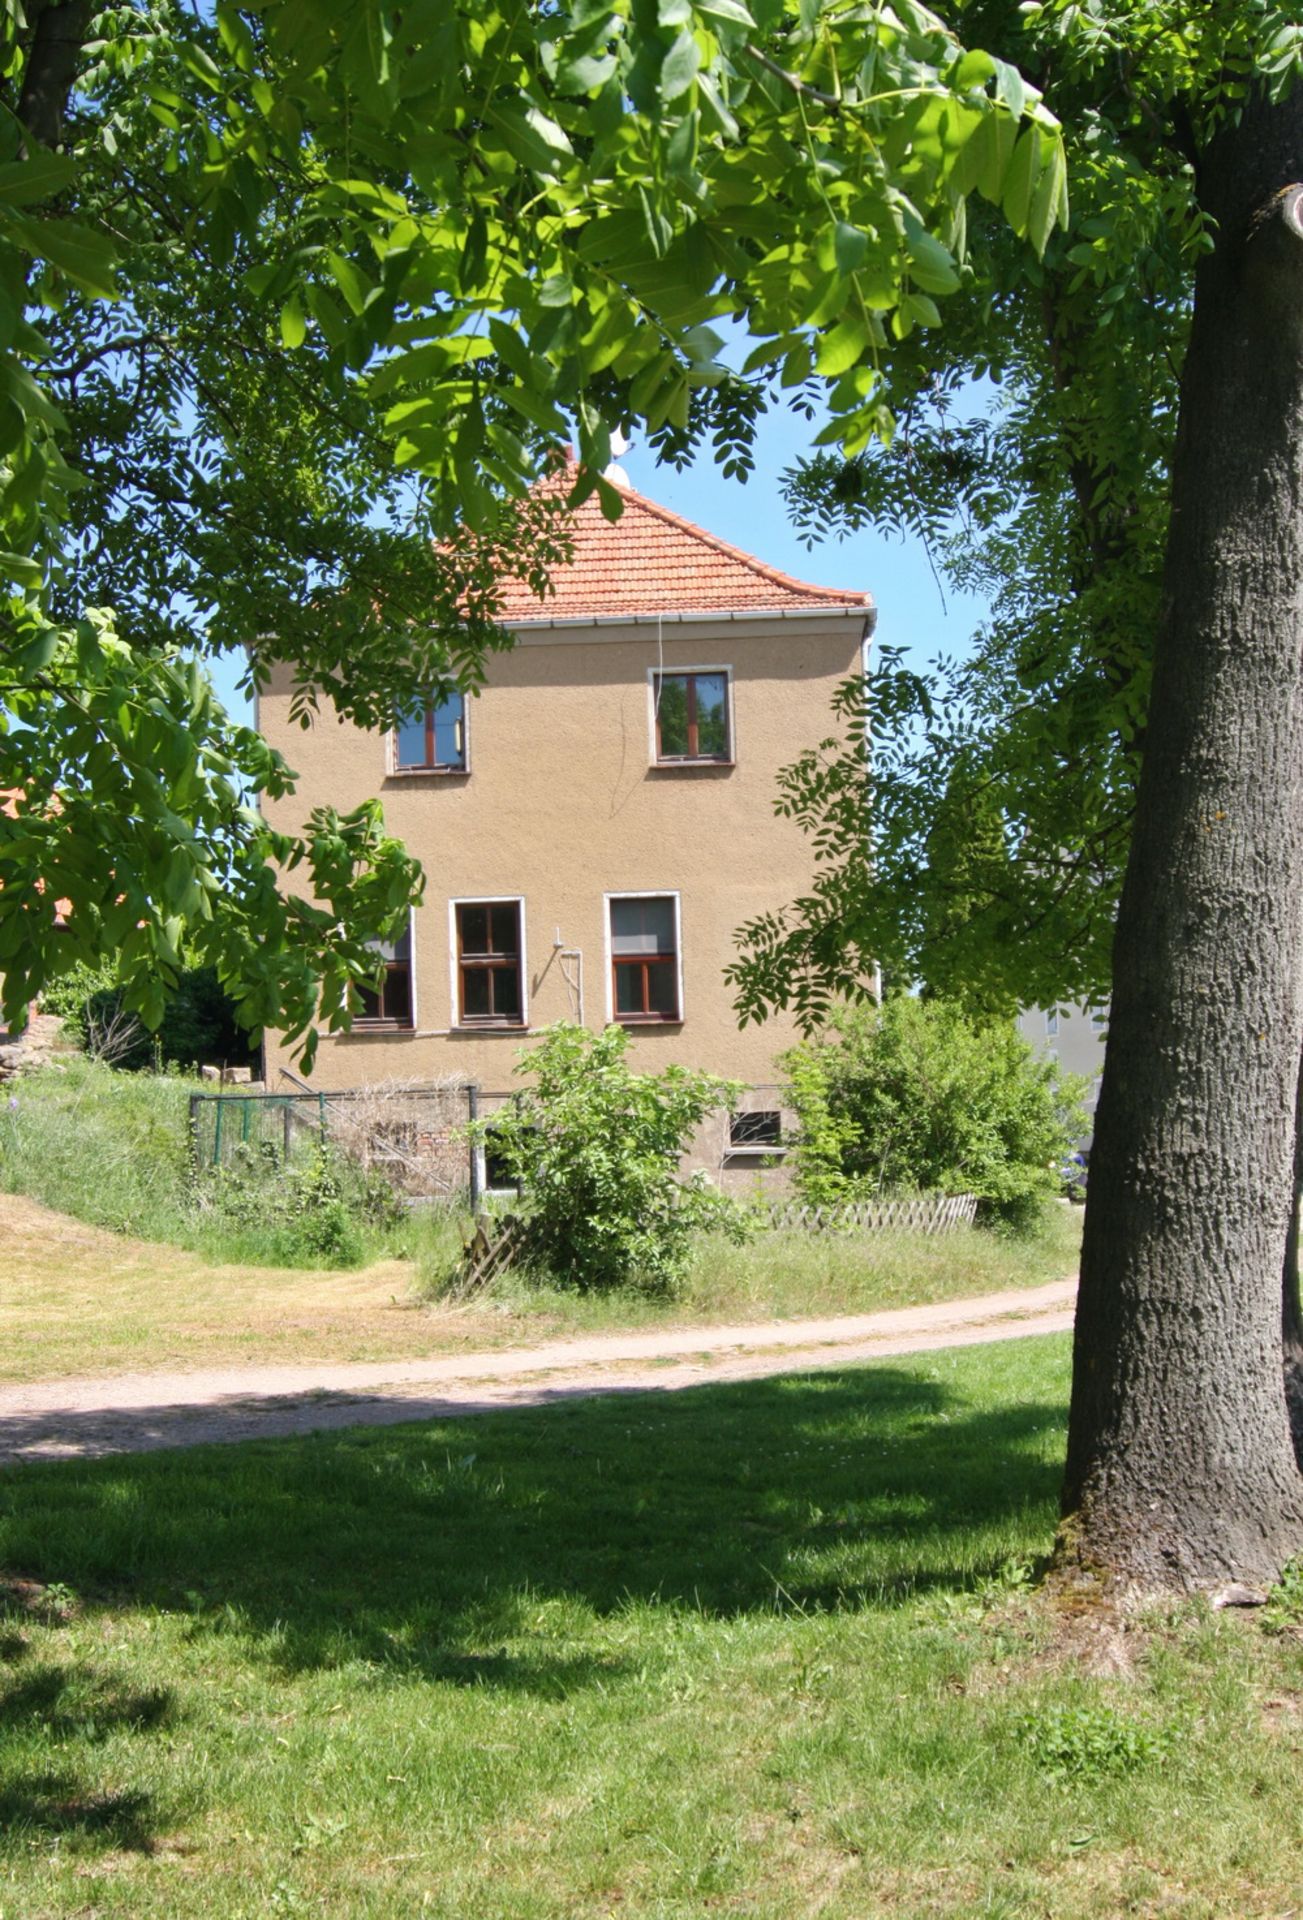 LARGE HOUSING BLOCK HORNSOMMEM, GERMANY READY TO MOVE INTO FREEHOLD VACANT POSSESSION - Image 15 of 91